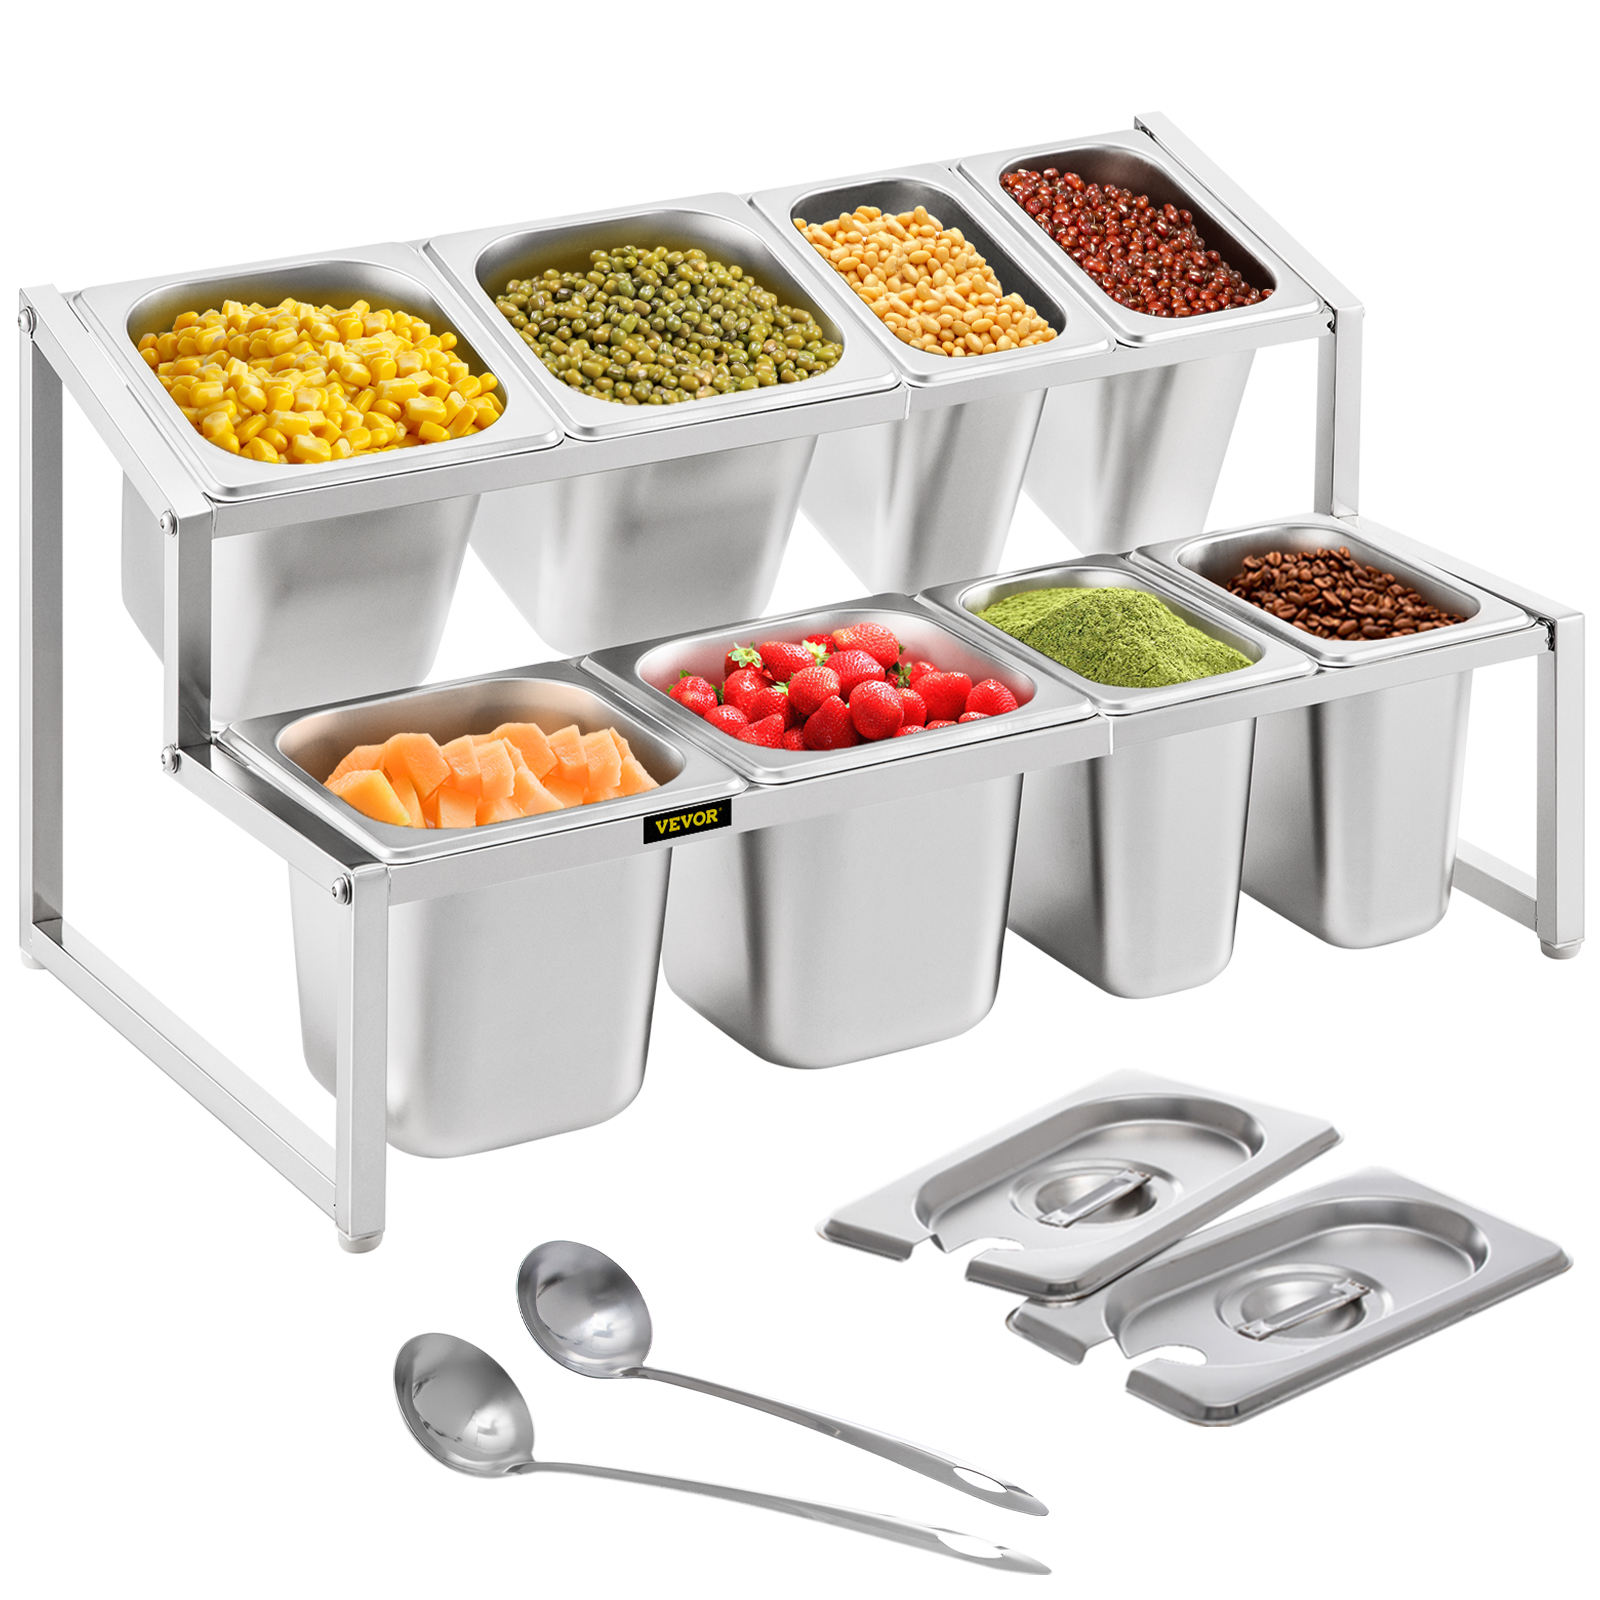 VEVOR Expandable Spice Rack Seasoning Organizer 2 Tiers with 8 Pans in 2 Sizes от Vevor Many GEOs